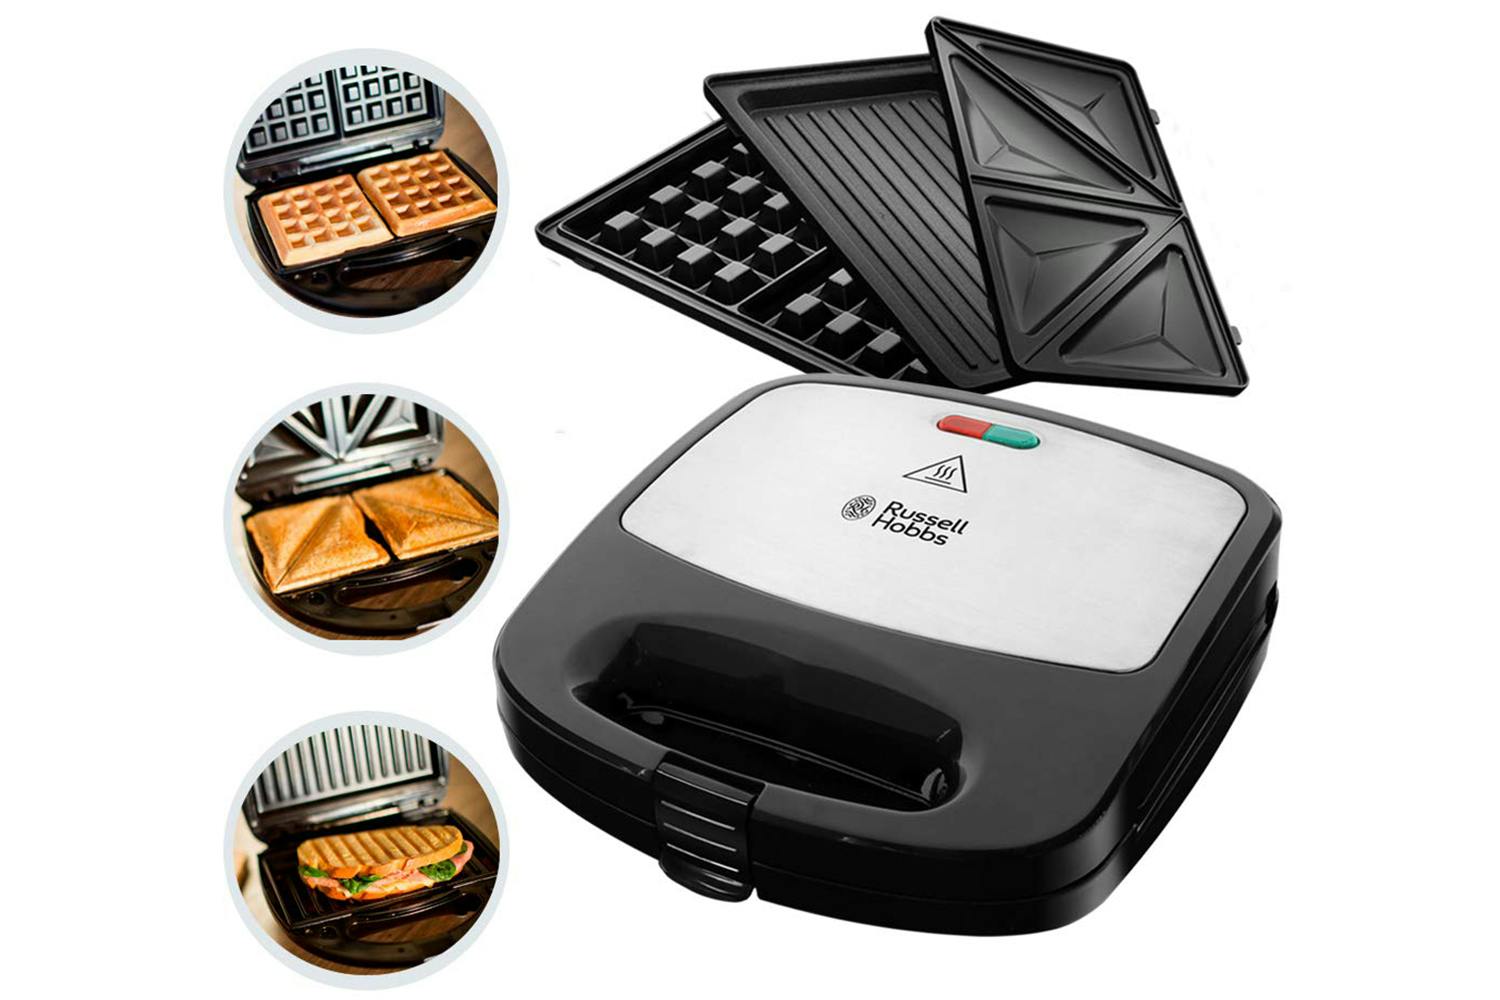 STONE STUDIO - Sandwich grill and waffle maker with removable